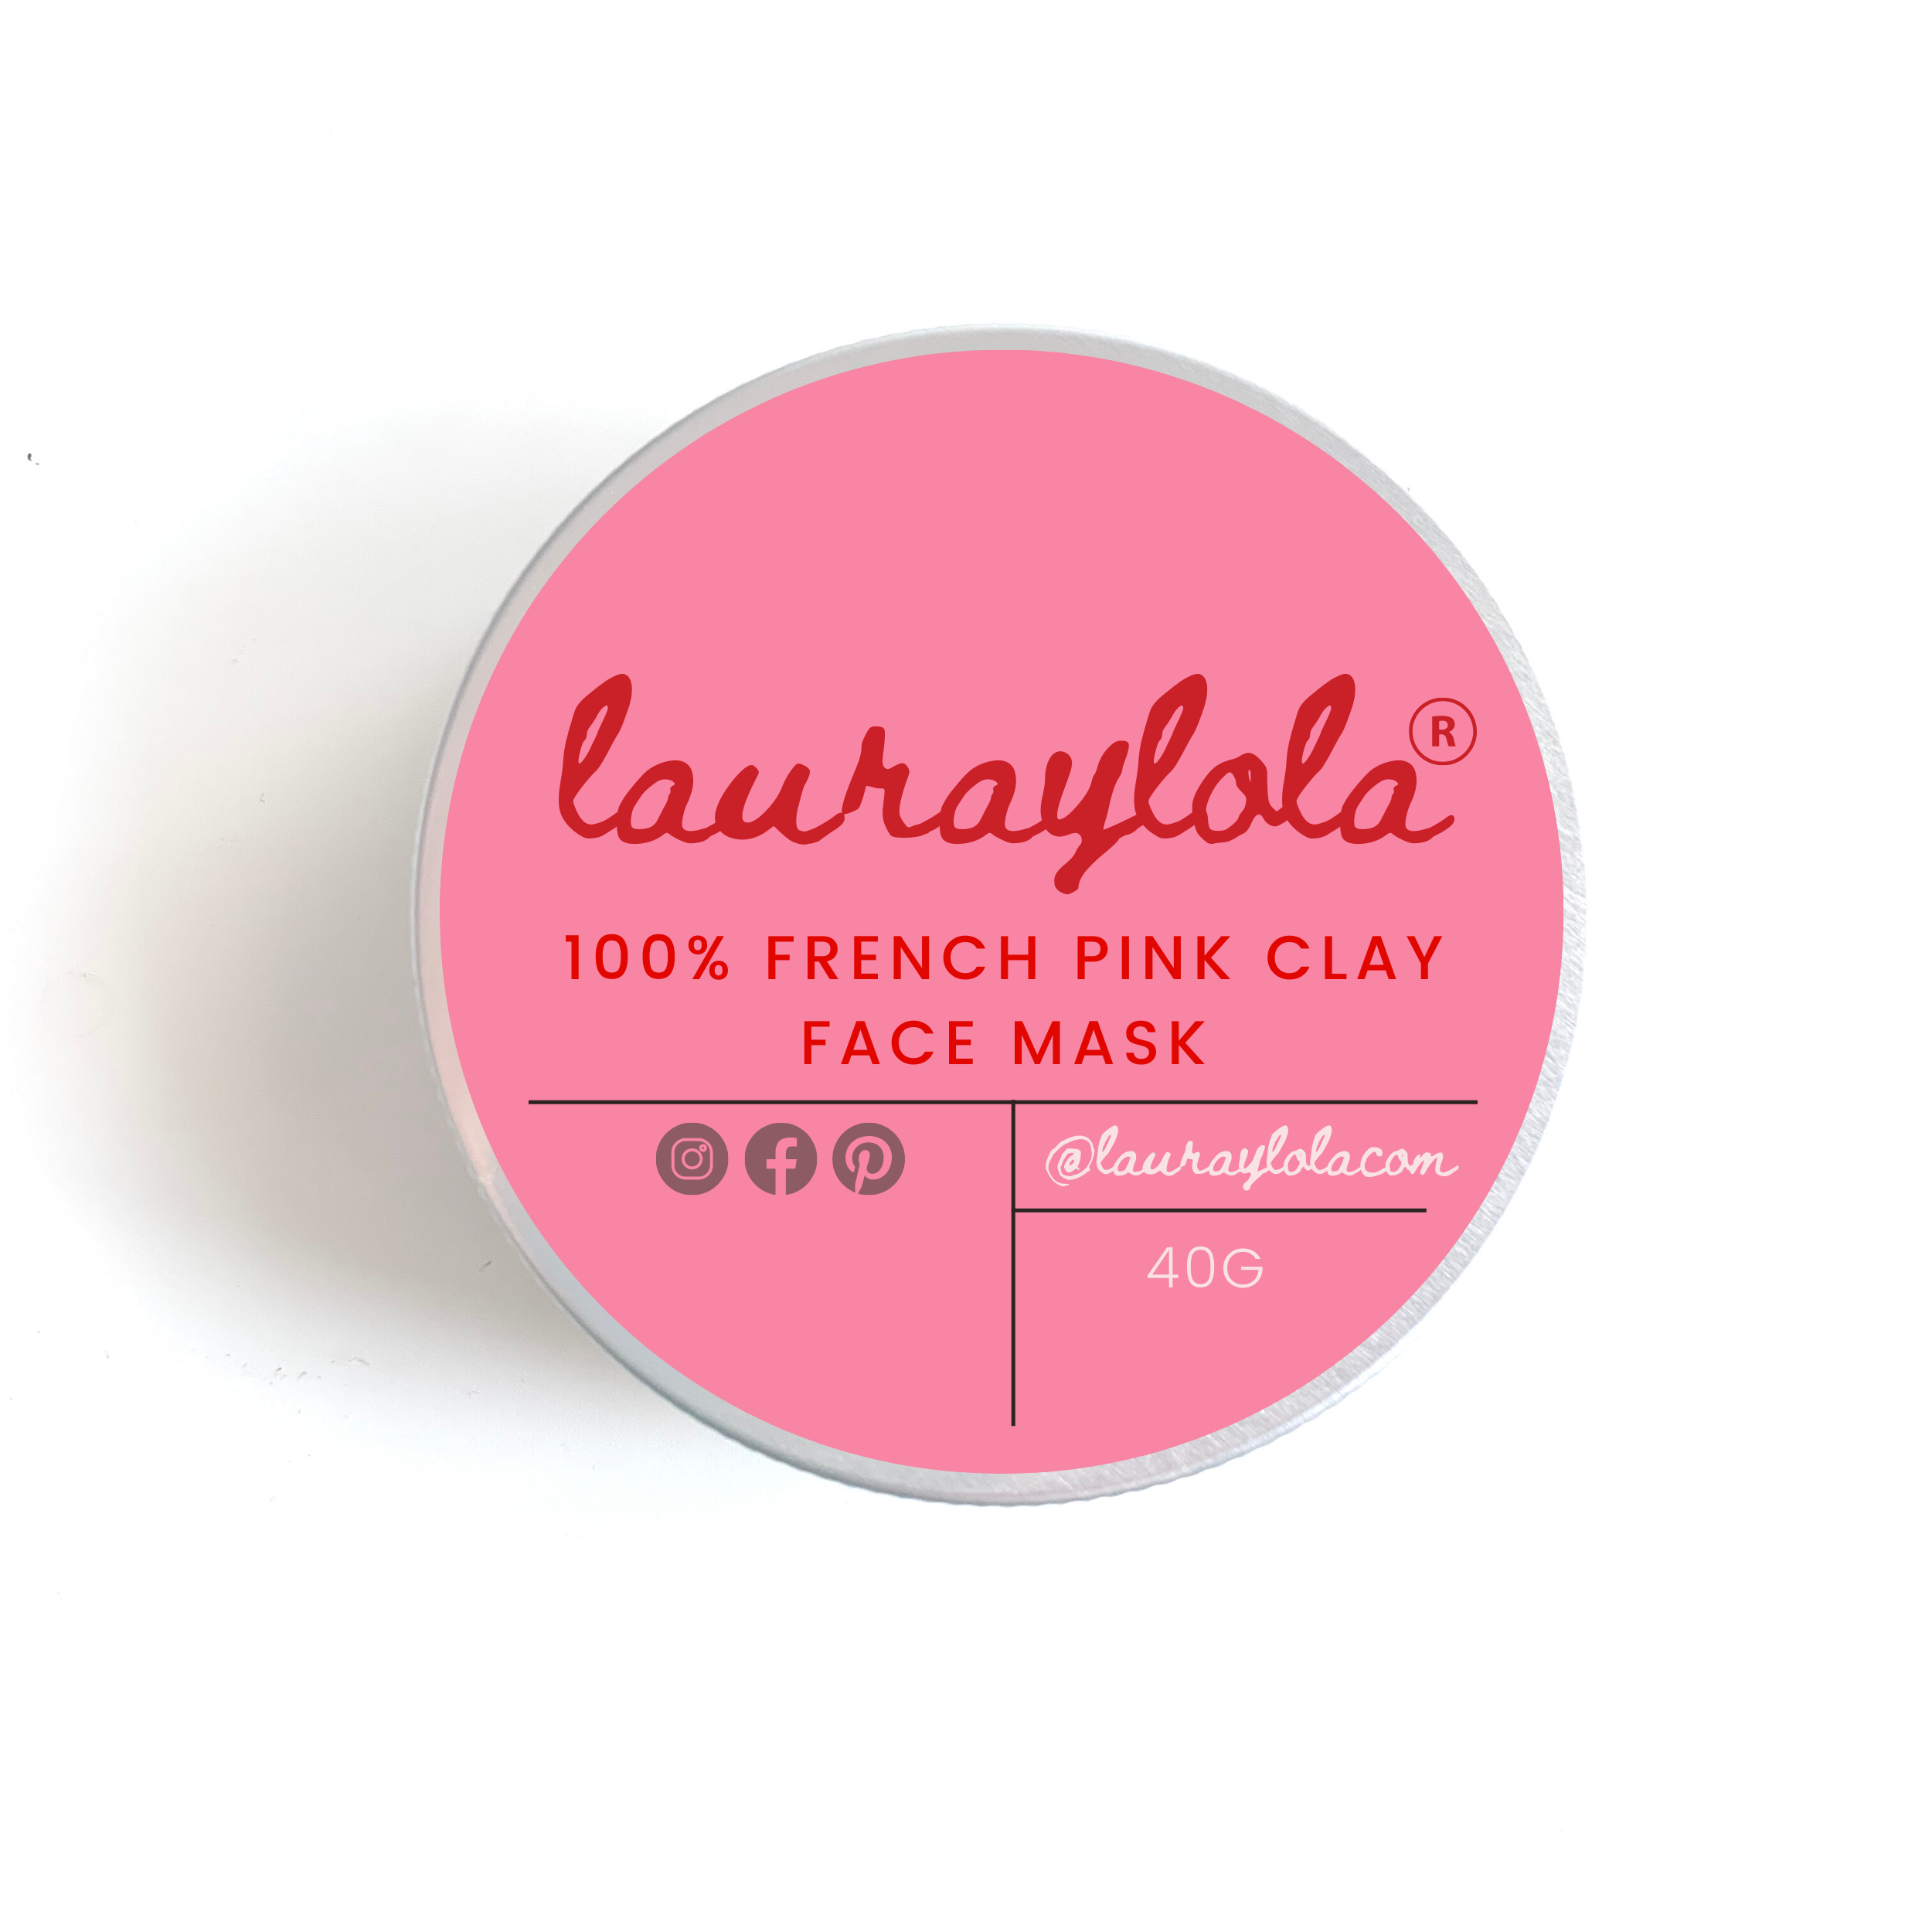 100% FRENCH PINK CLAY FACIAL SKIN TREATMENT